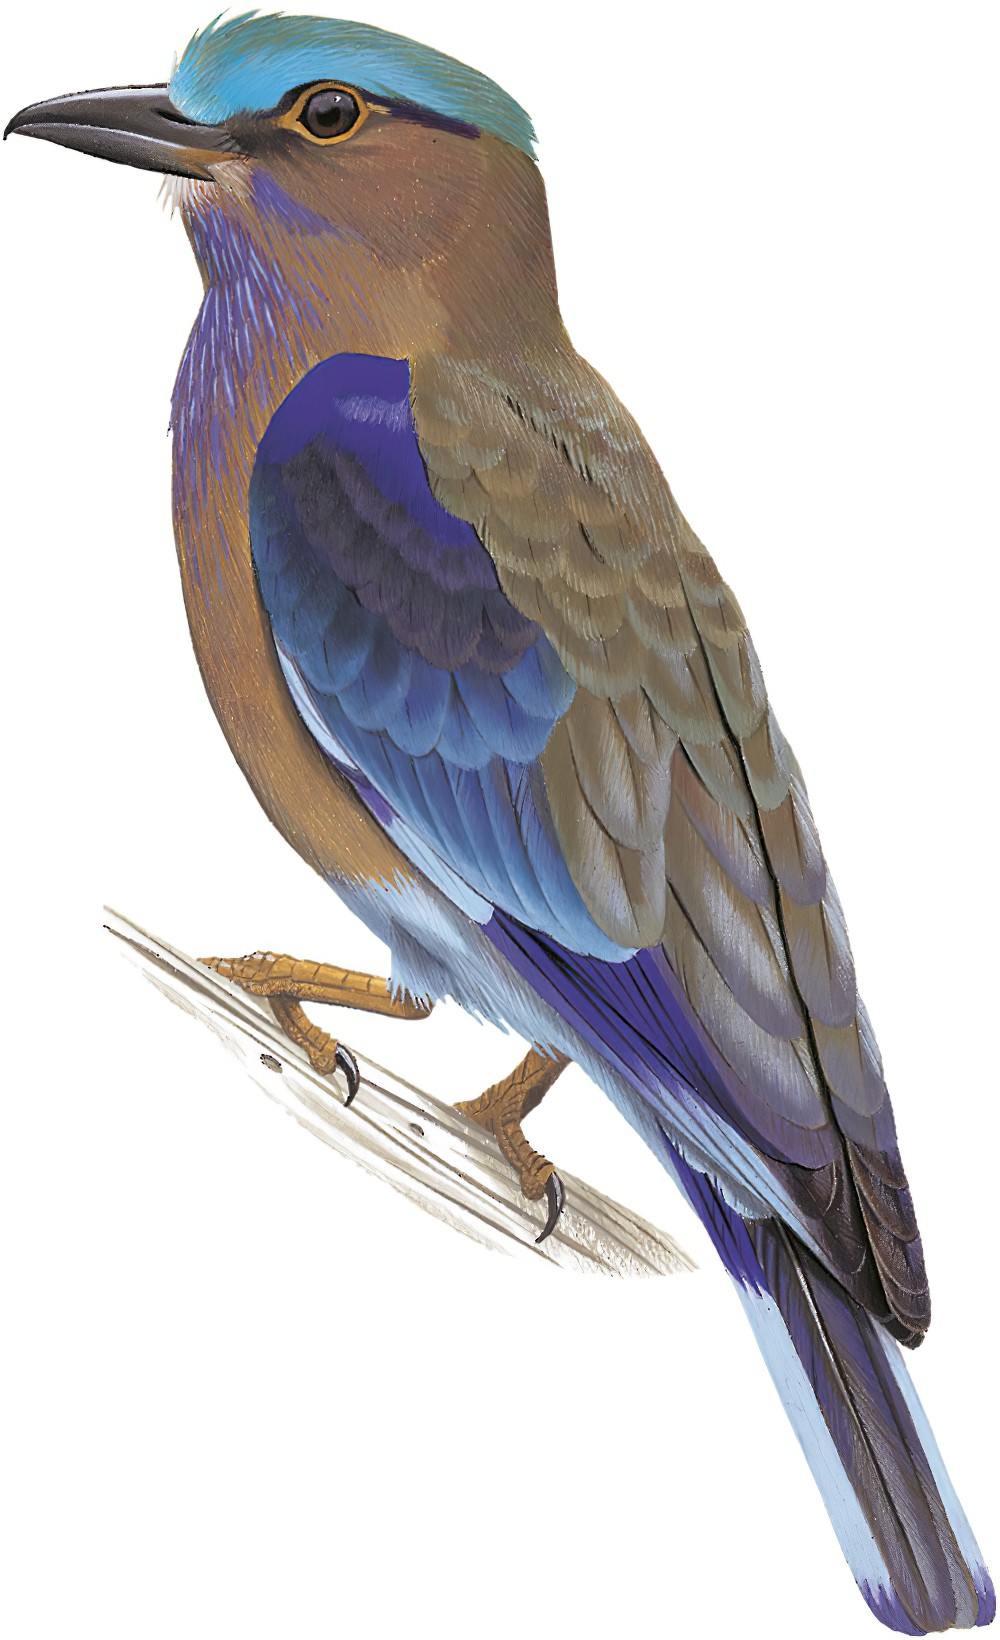 Indochinese Roller / Coracias affinis